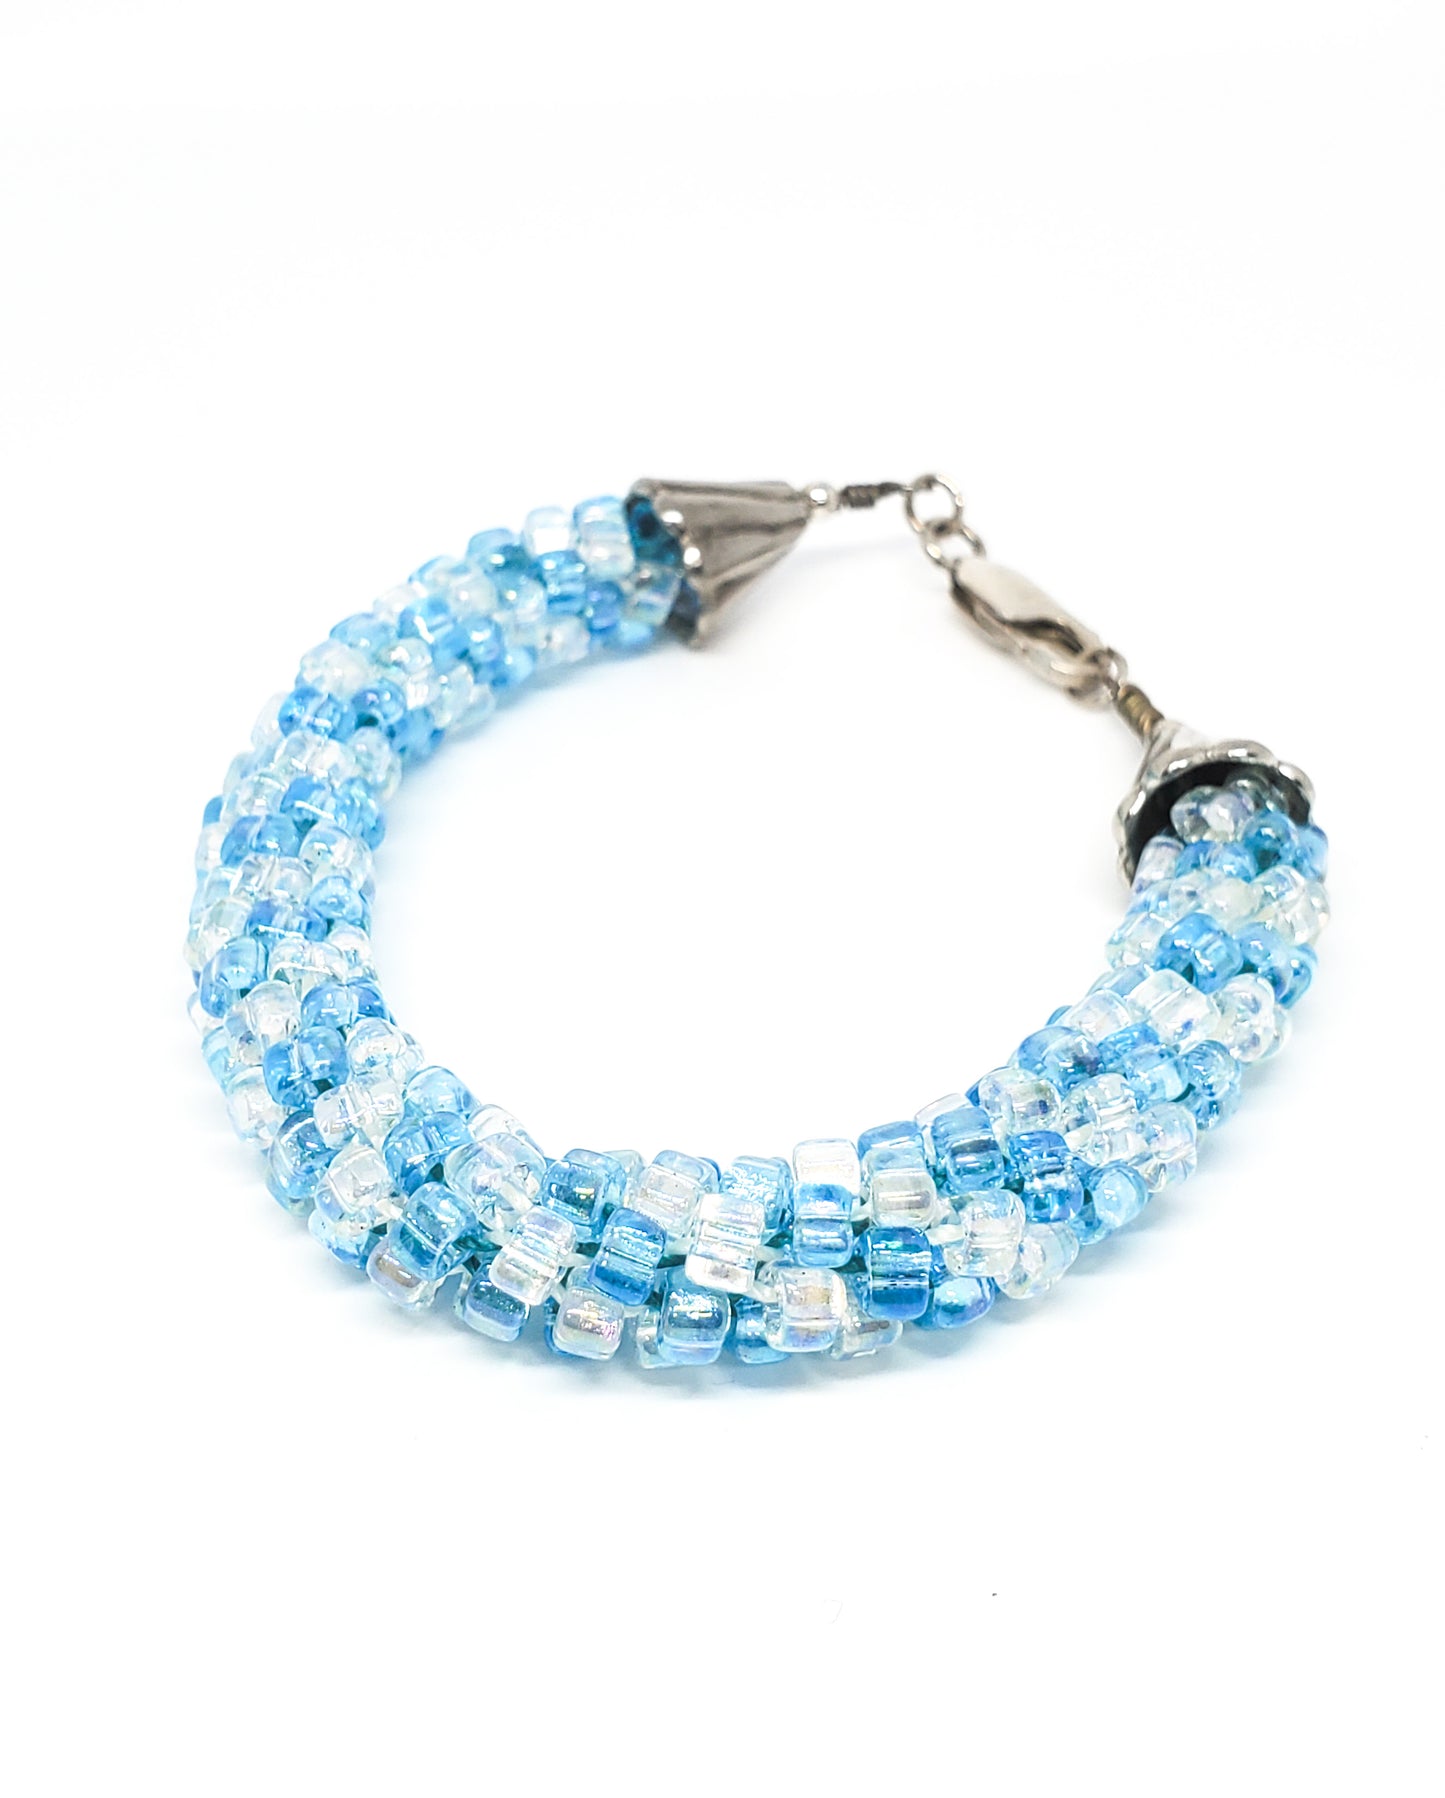 Oceans baby blue and clear torsade beaded bracelet with sterling silver clasp